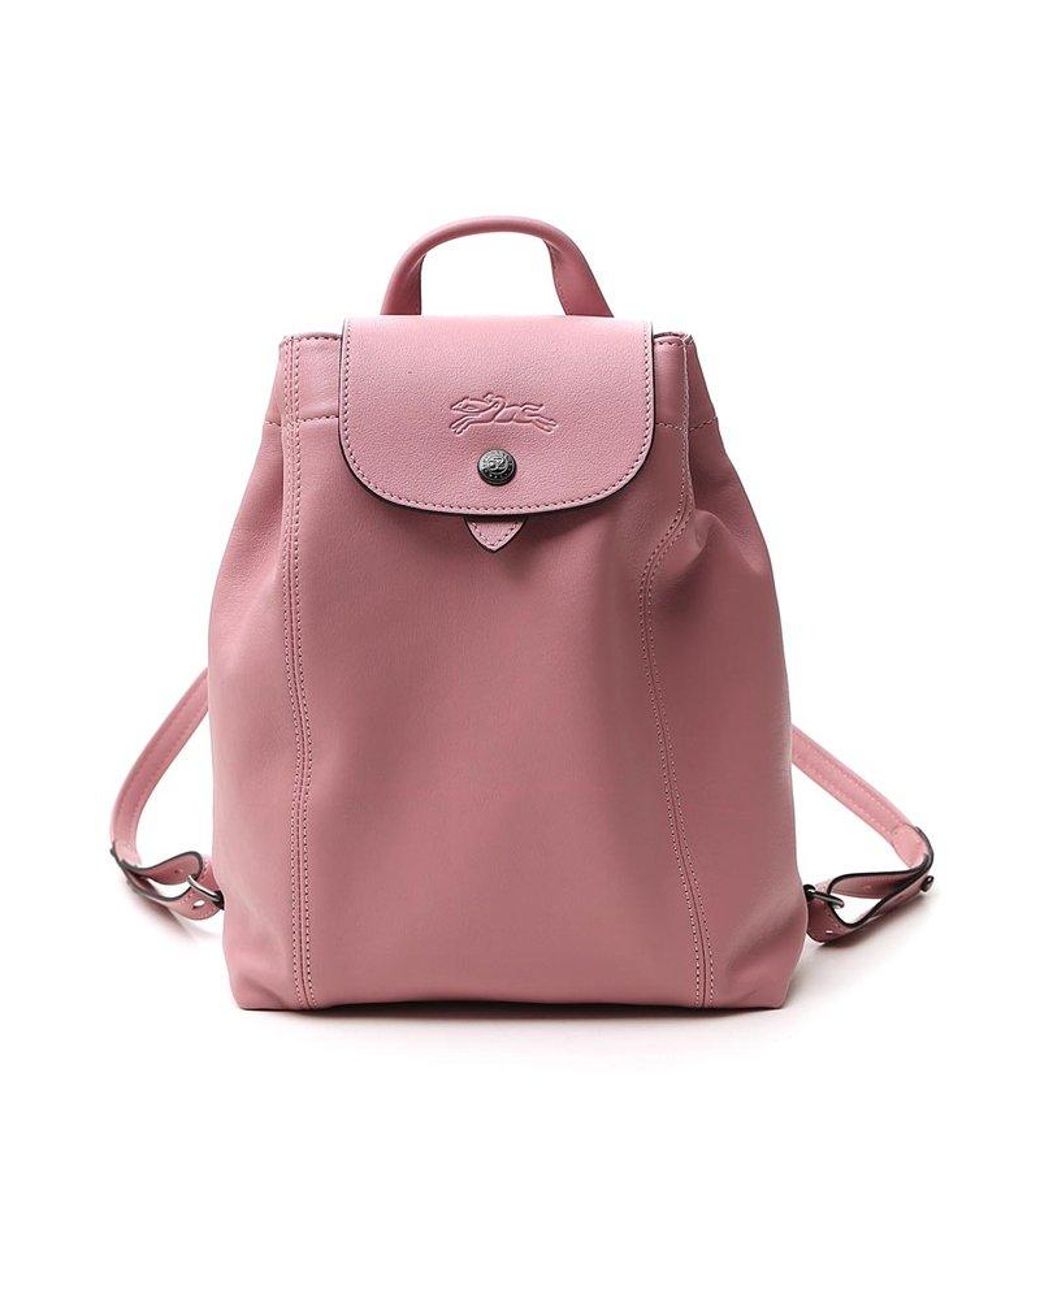 Le Pliage Cuir Backpack with Top Handle